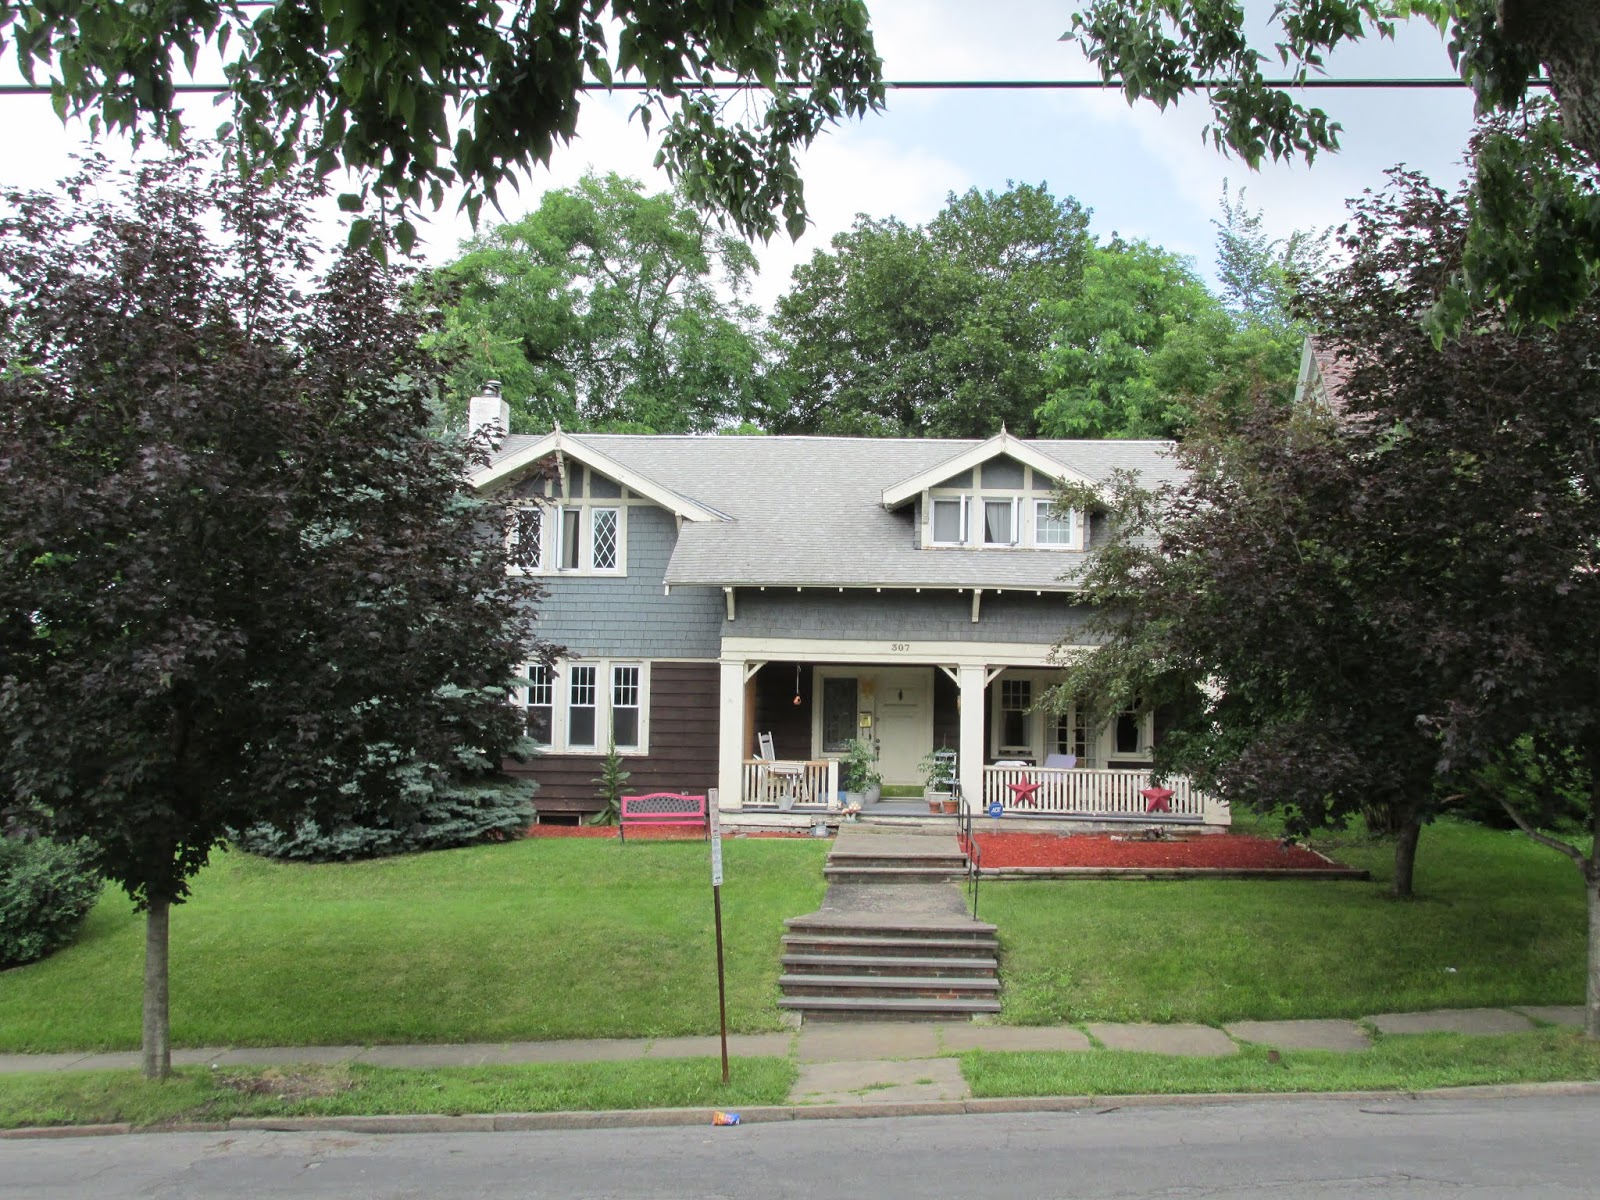 My Central New York Consider The Bungalow Always A Favorite House Type